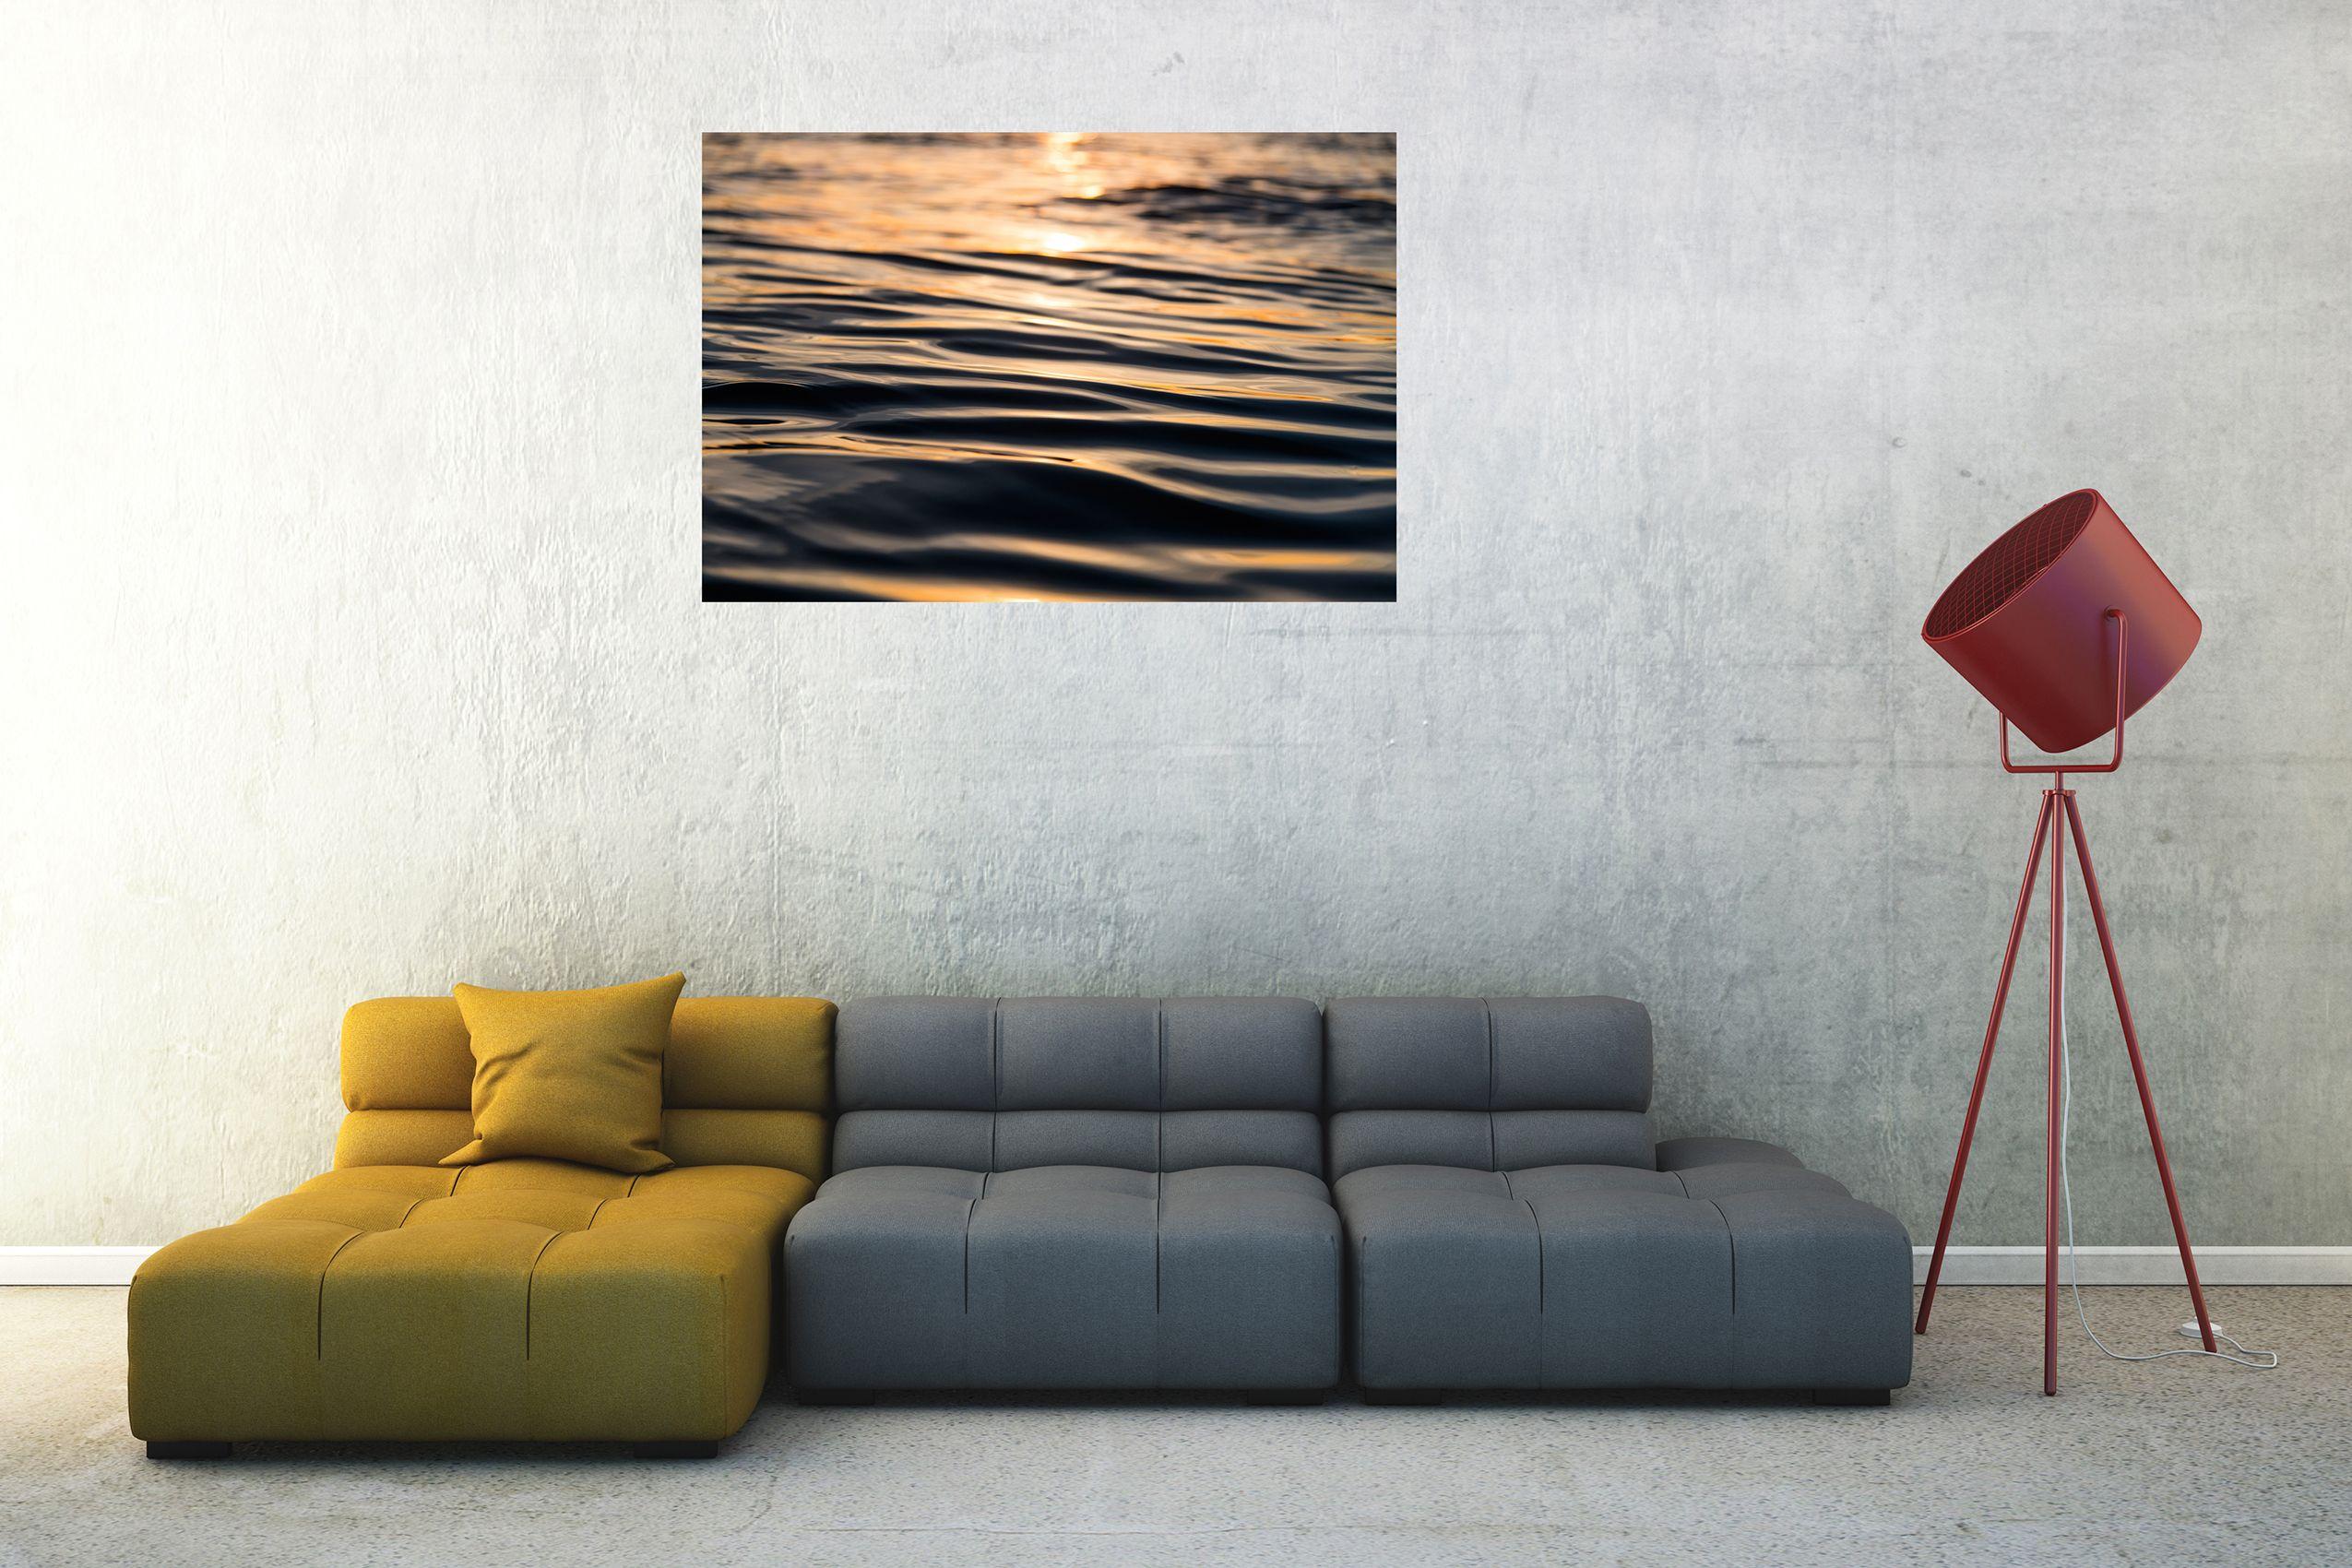 One of a series of images where Andrew has used a paddle board to capture a minimalist colour artwork. Laying down on the board created a unique perspective of the sea. This beautiful colour print shows that nature is the best artist displaying the